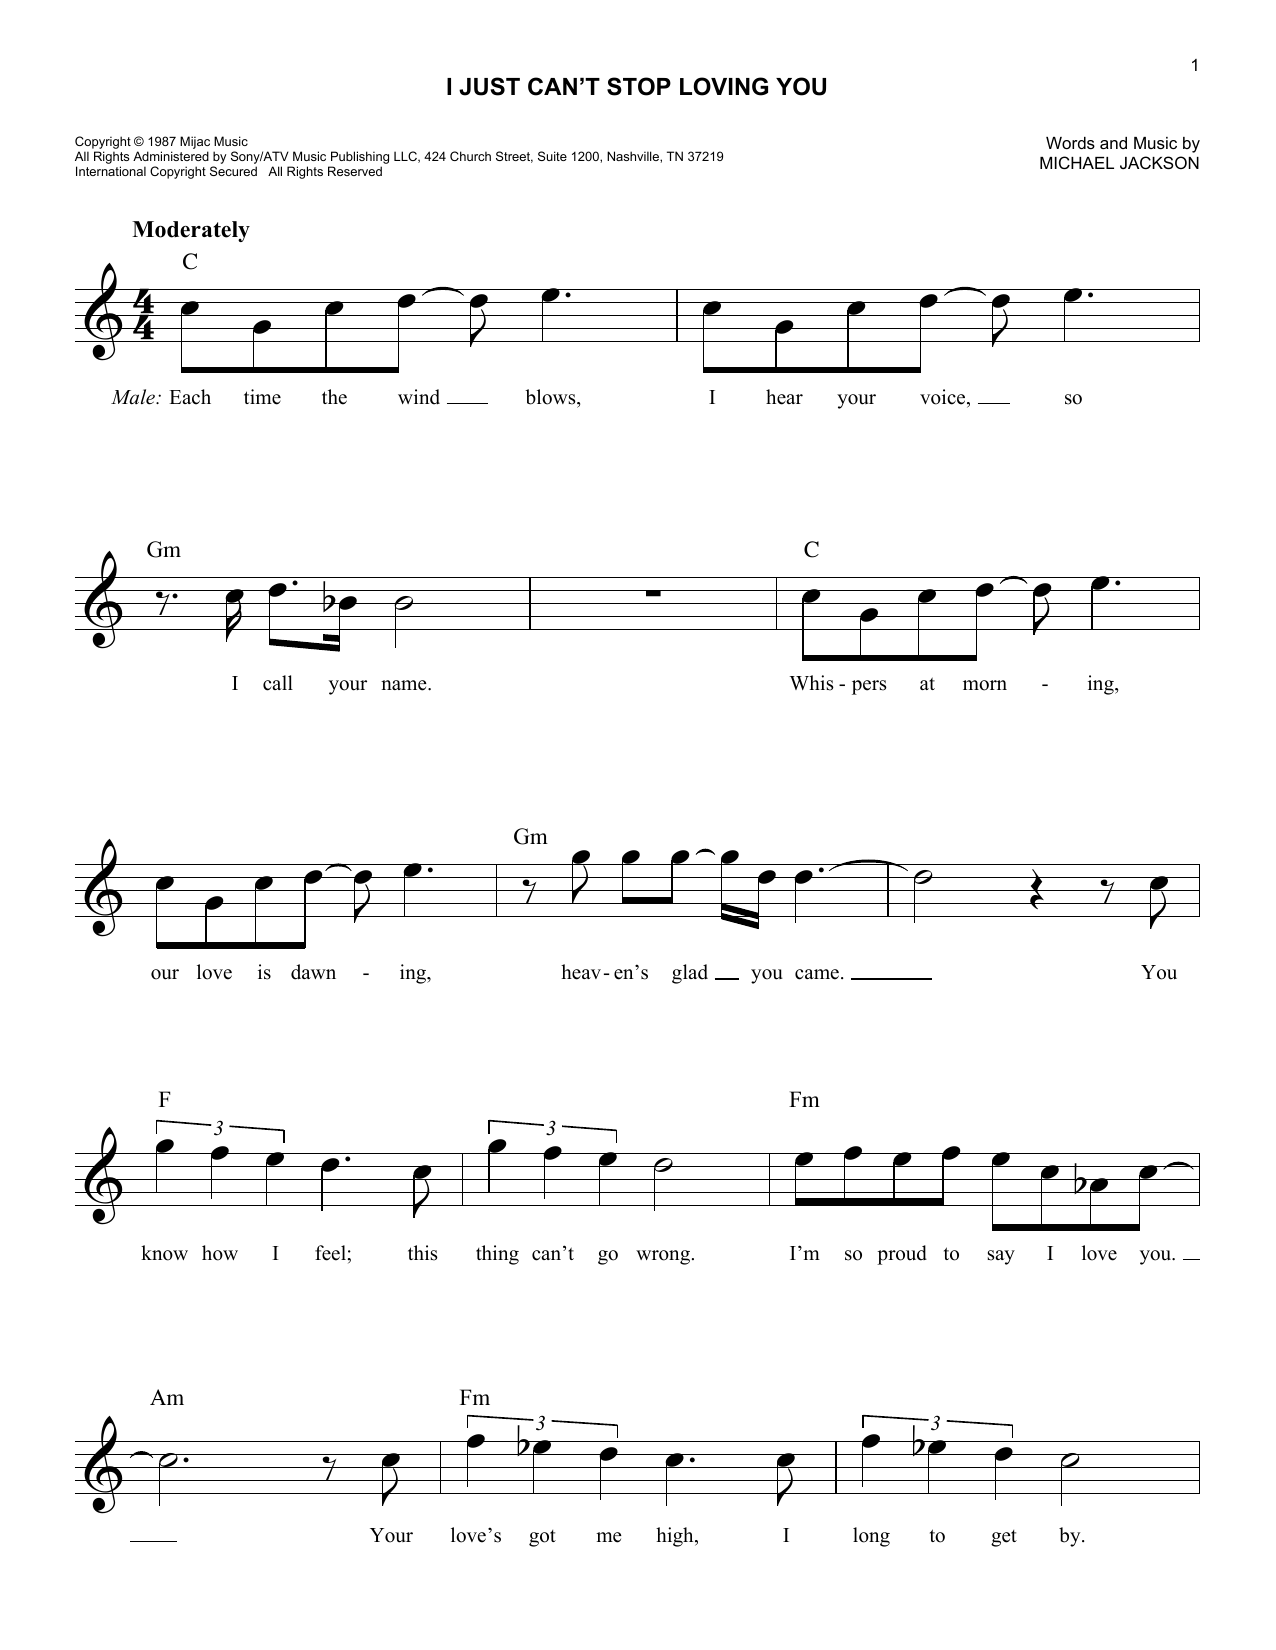 Download Michael Jackson I Just Can't Stop Loving You Sheet Music